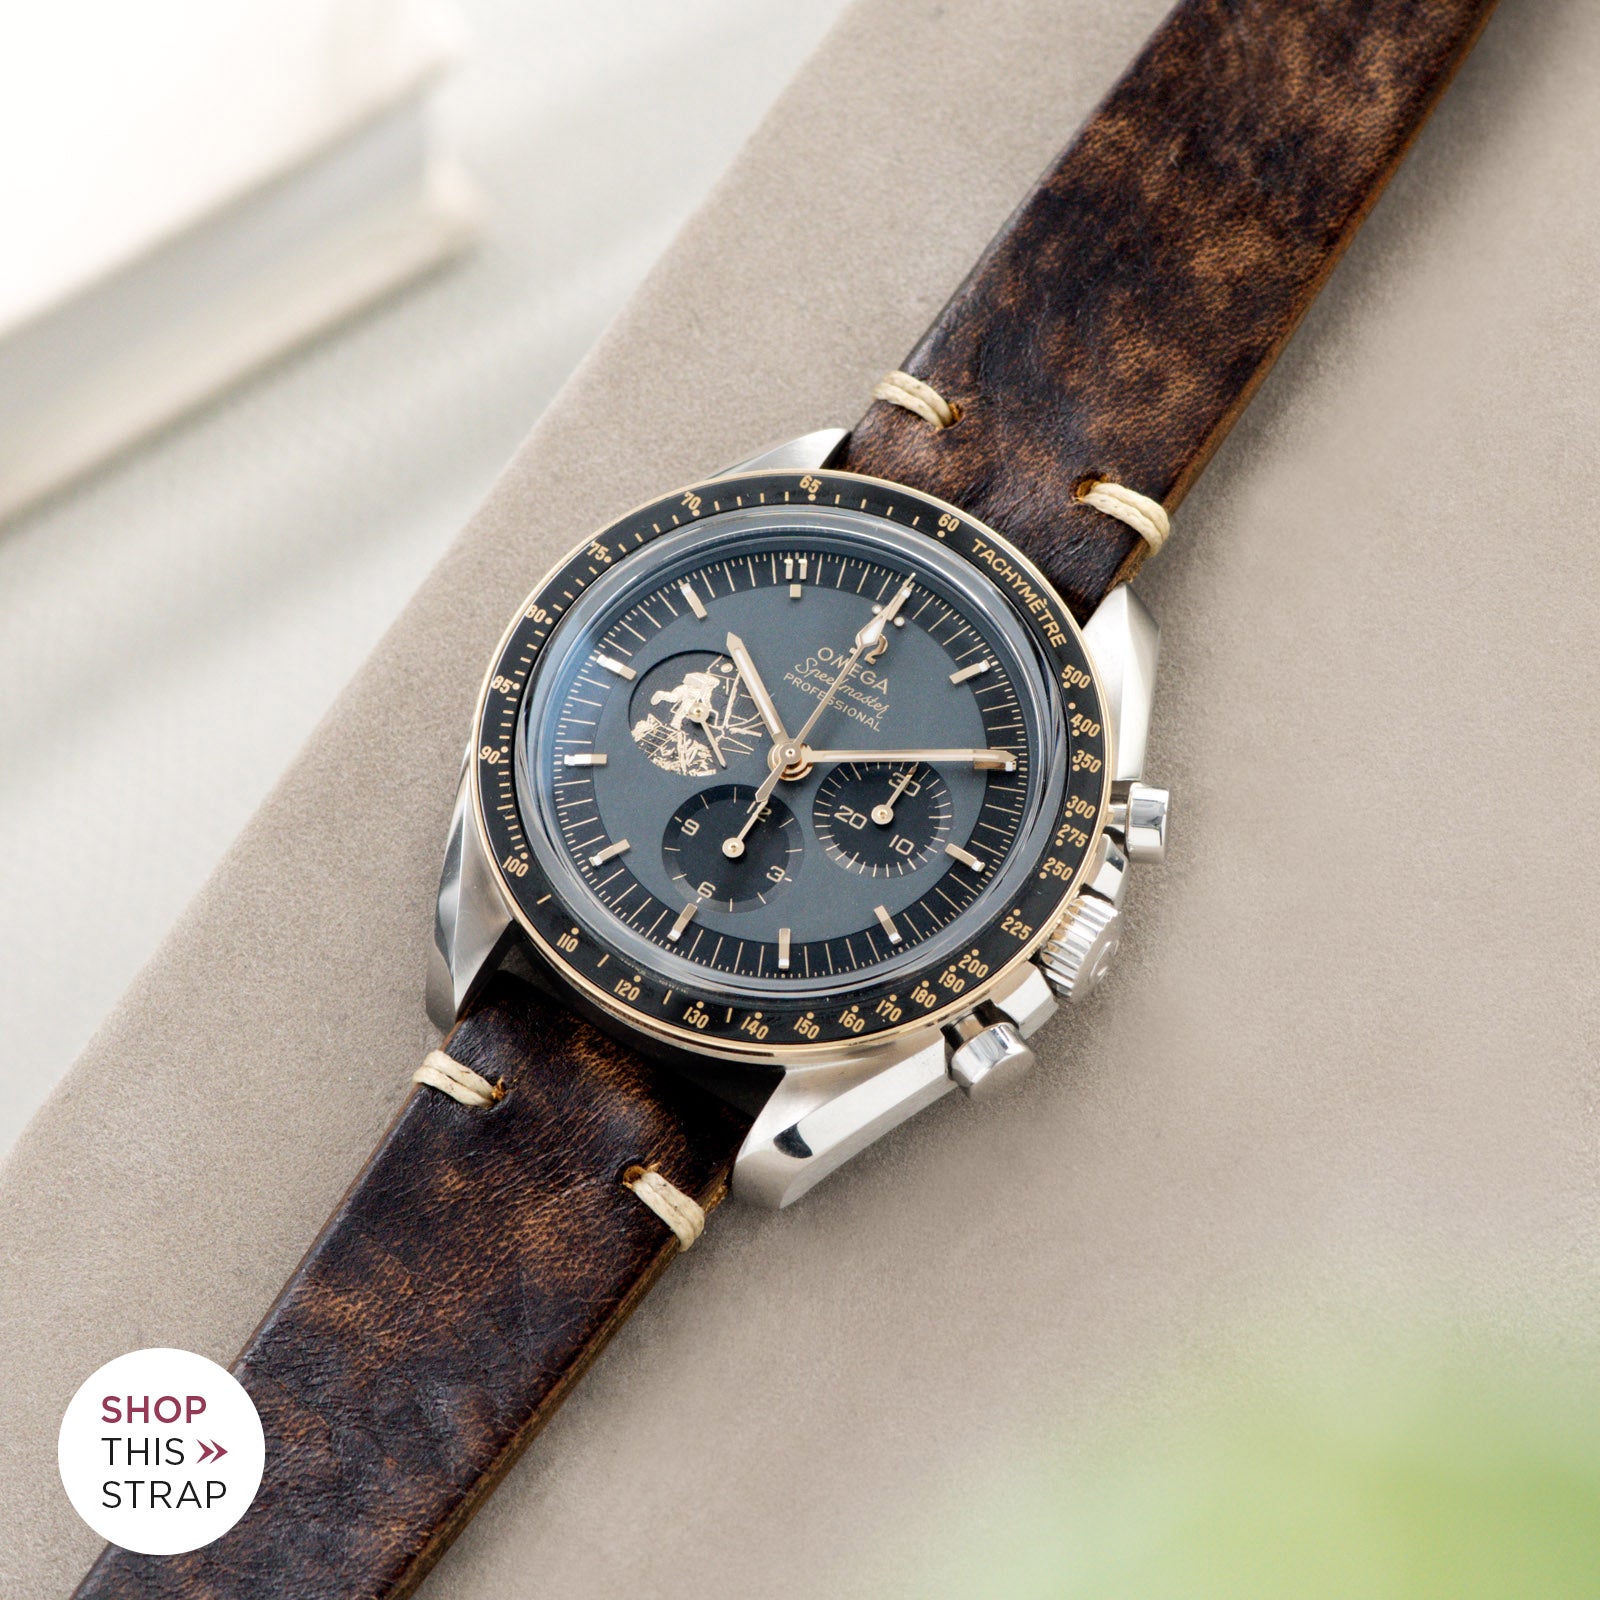 Bulang and Sons_Strap Guide_Omega Speedmaster Apollo 11 50TH Anniversary Watch_Woodie Brown Leather Watch Strap